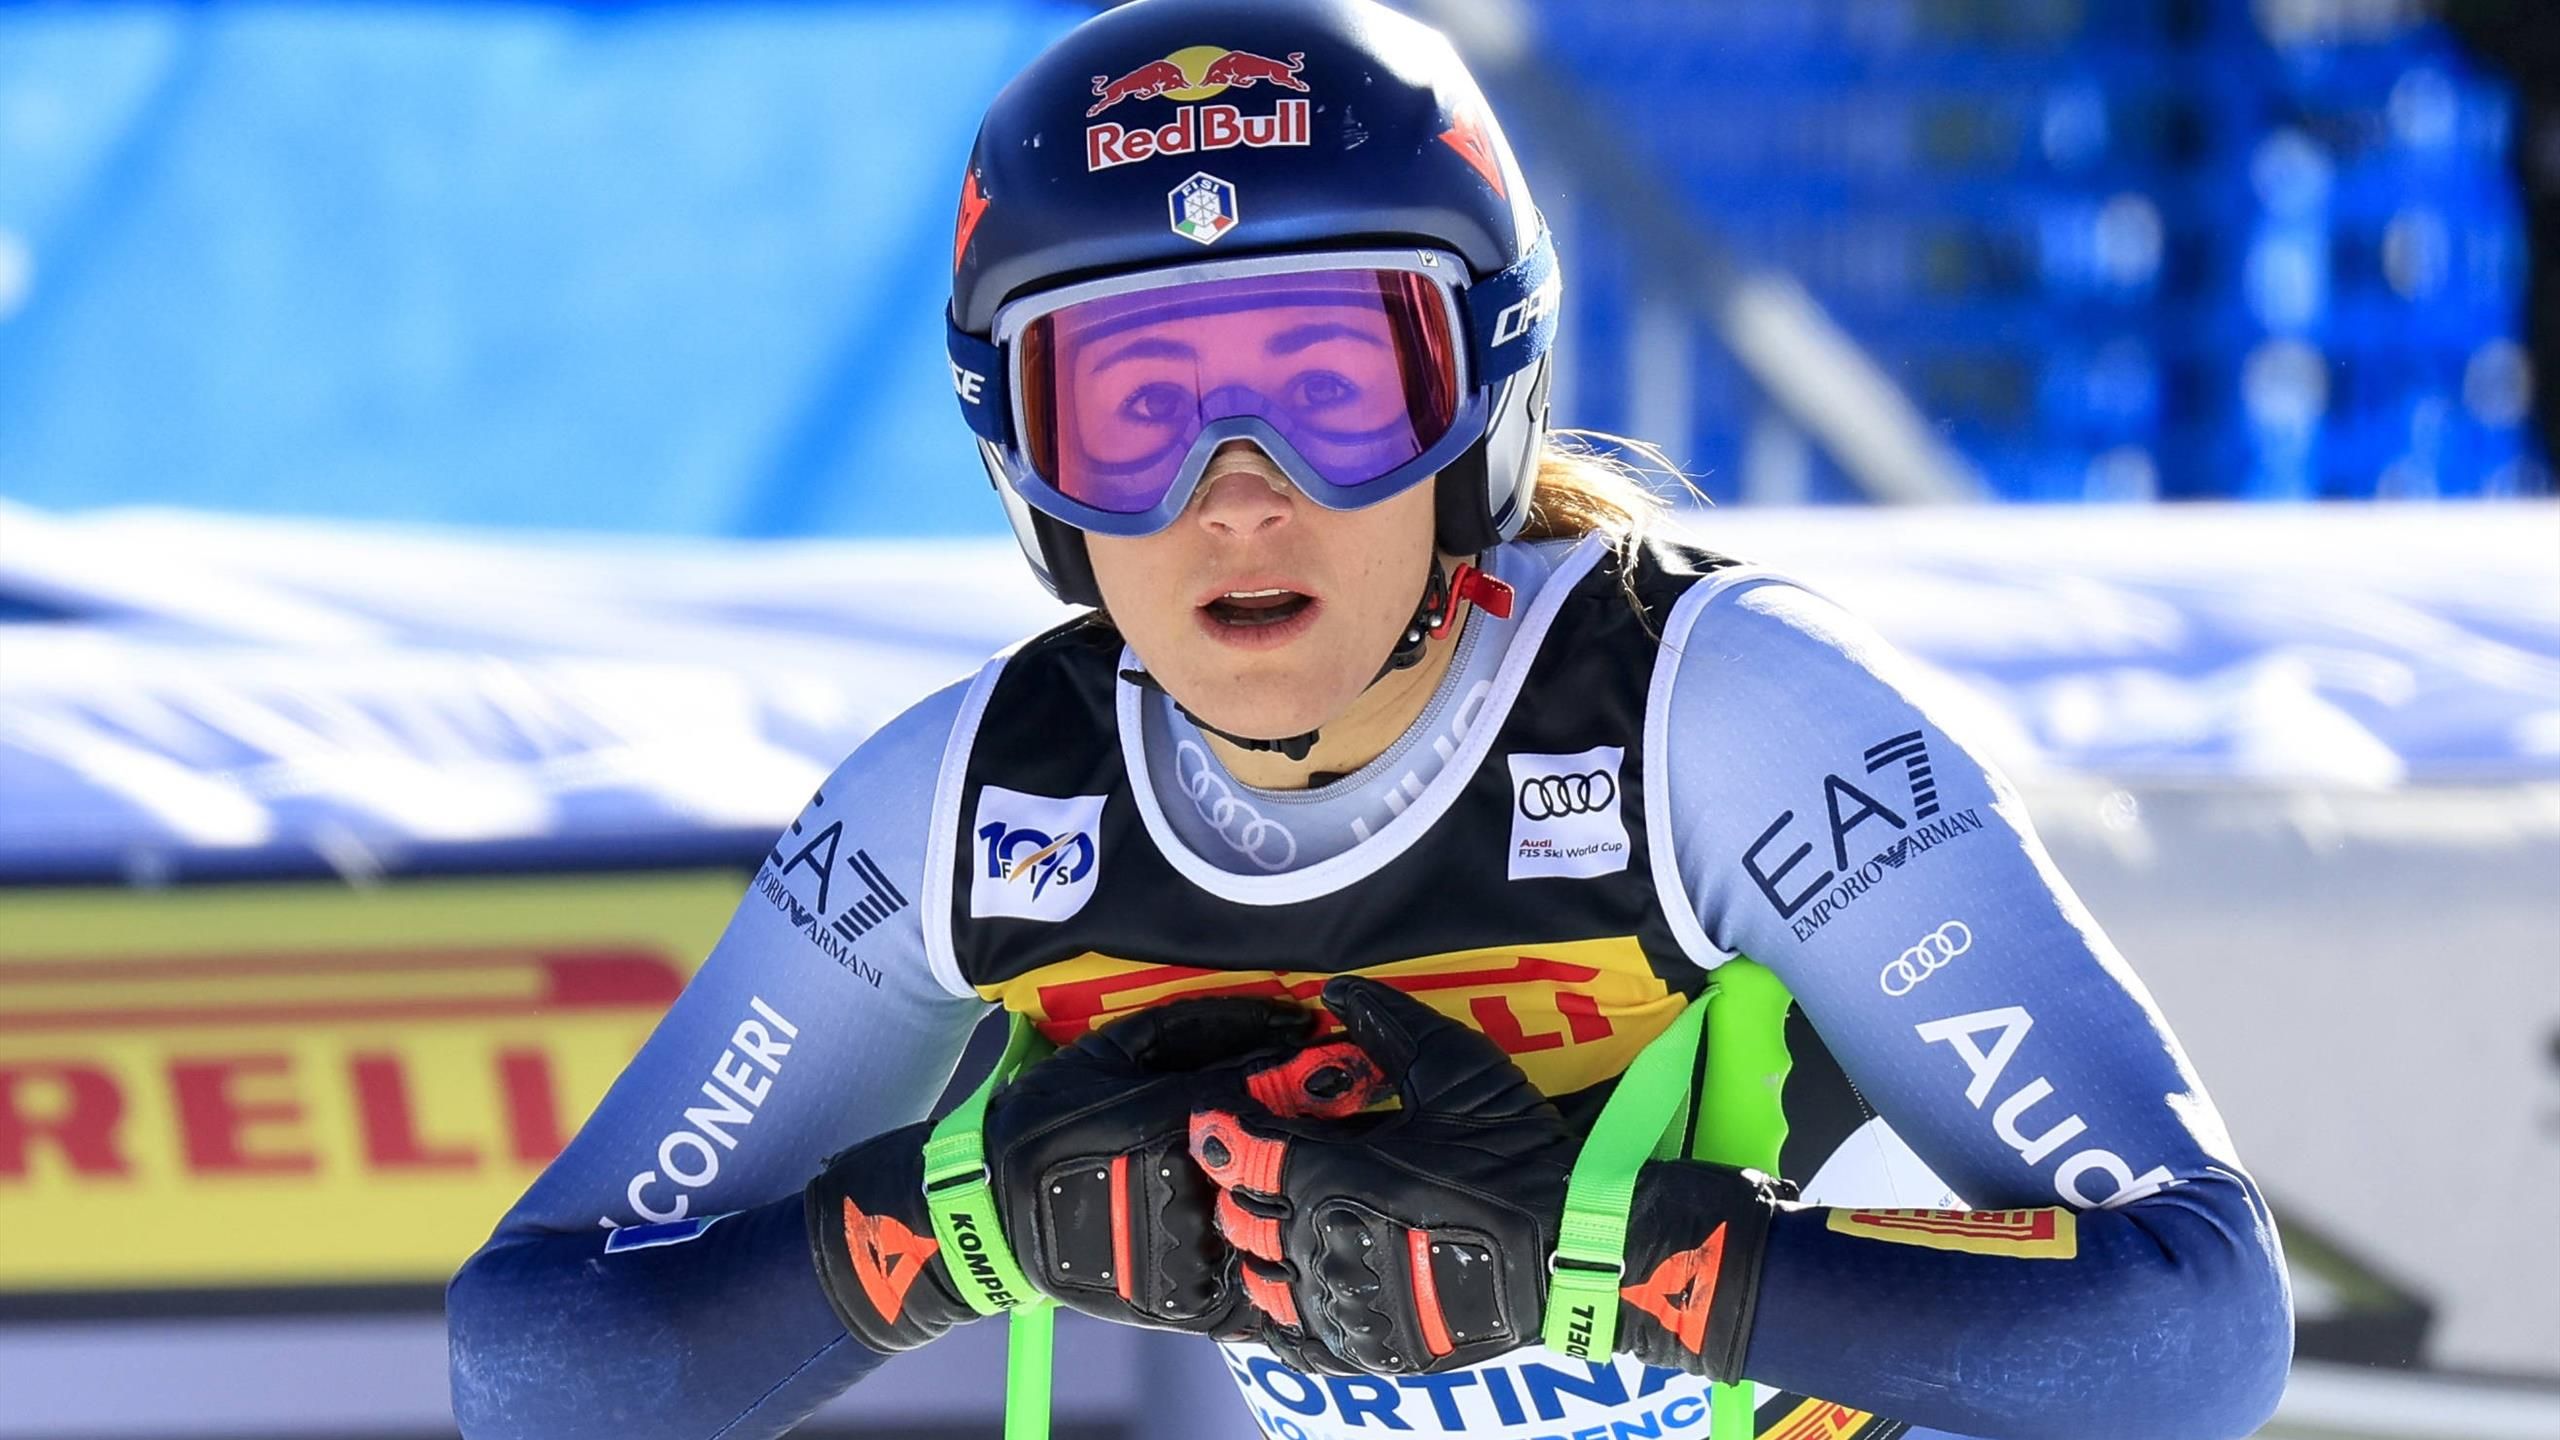 Alpine skiing: Sofia Goggia speaks out after horror diagnosis – Olympic champion has already undergone surgery in Milan